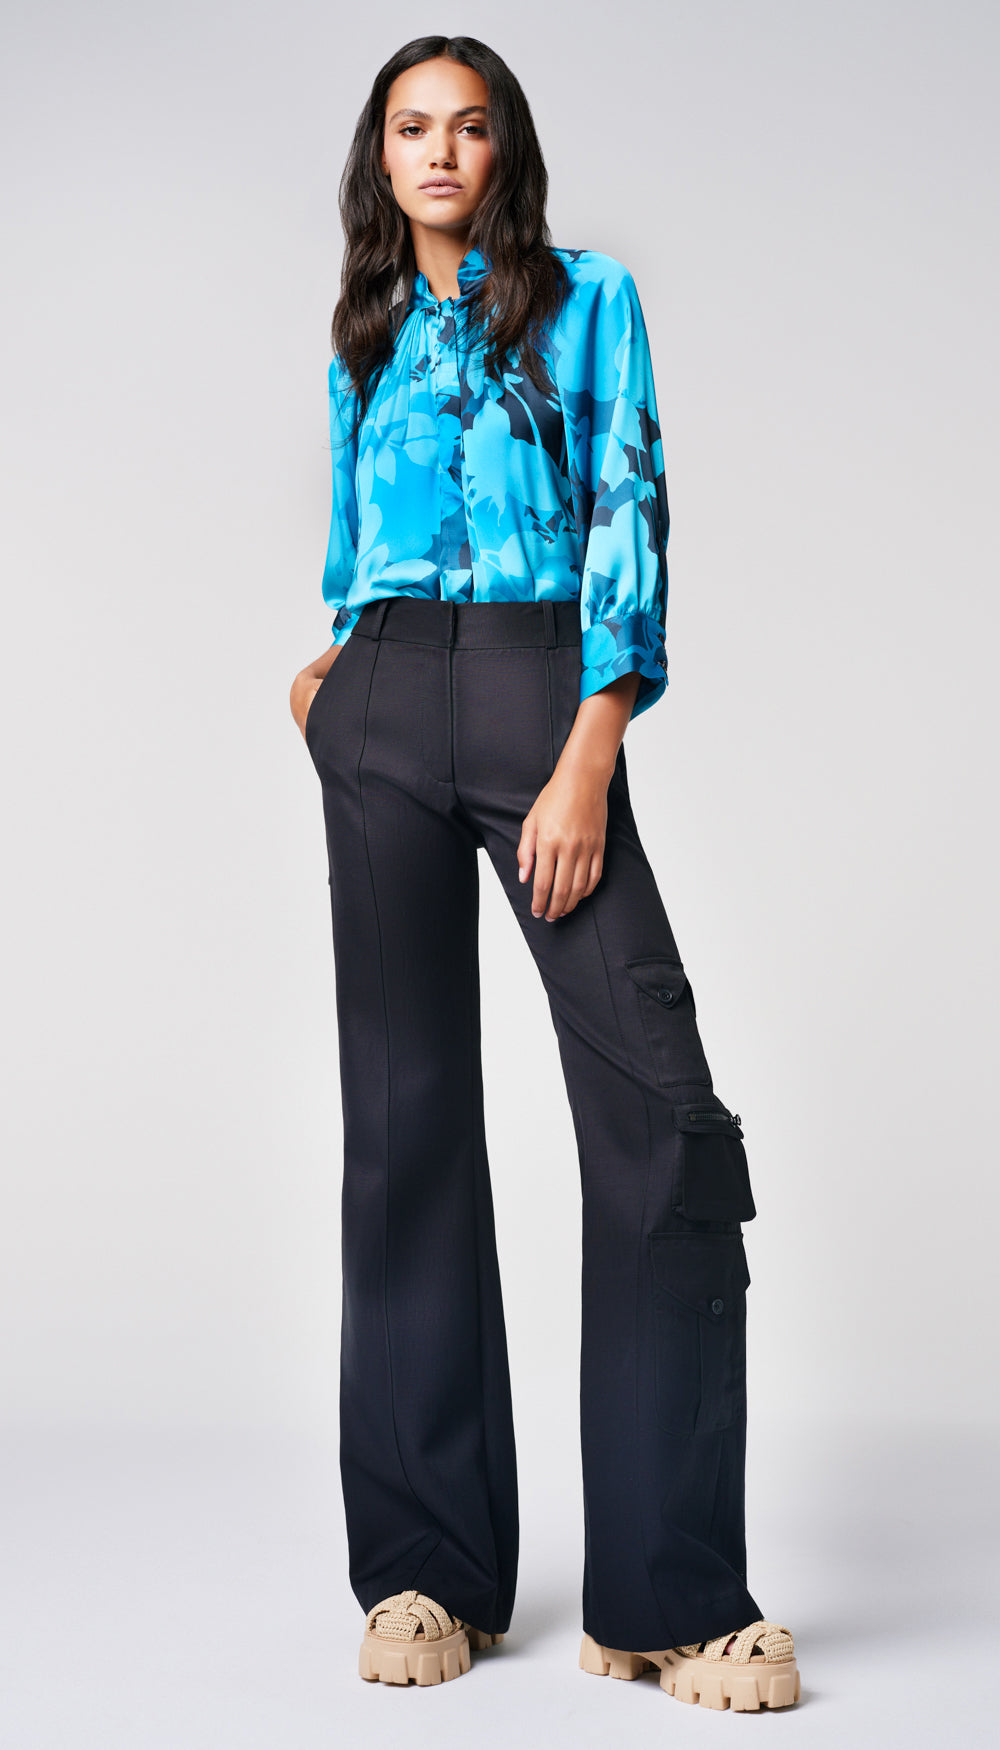 A woman in a blue floral blouse and black cargo pants.